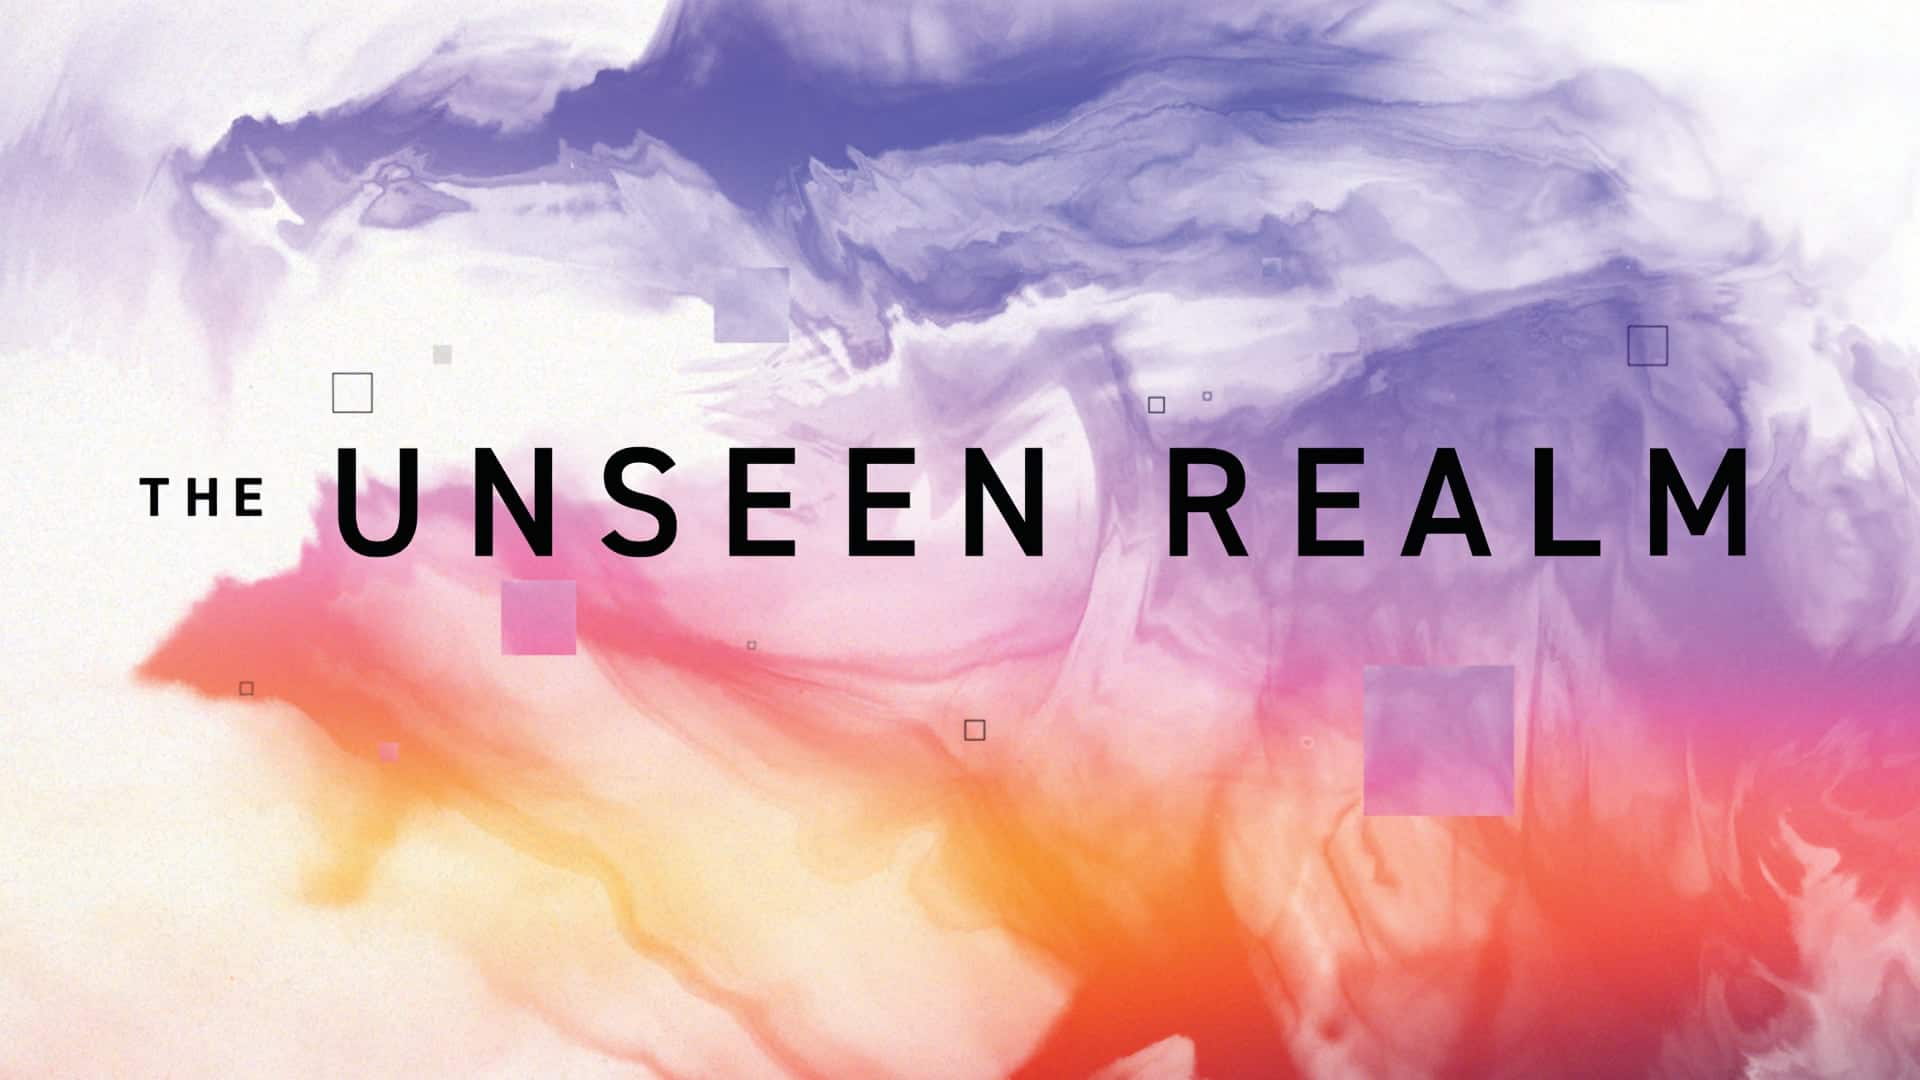 The Unseen Realm: A Review